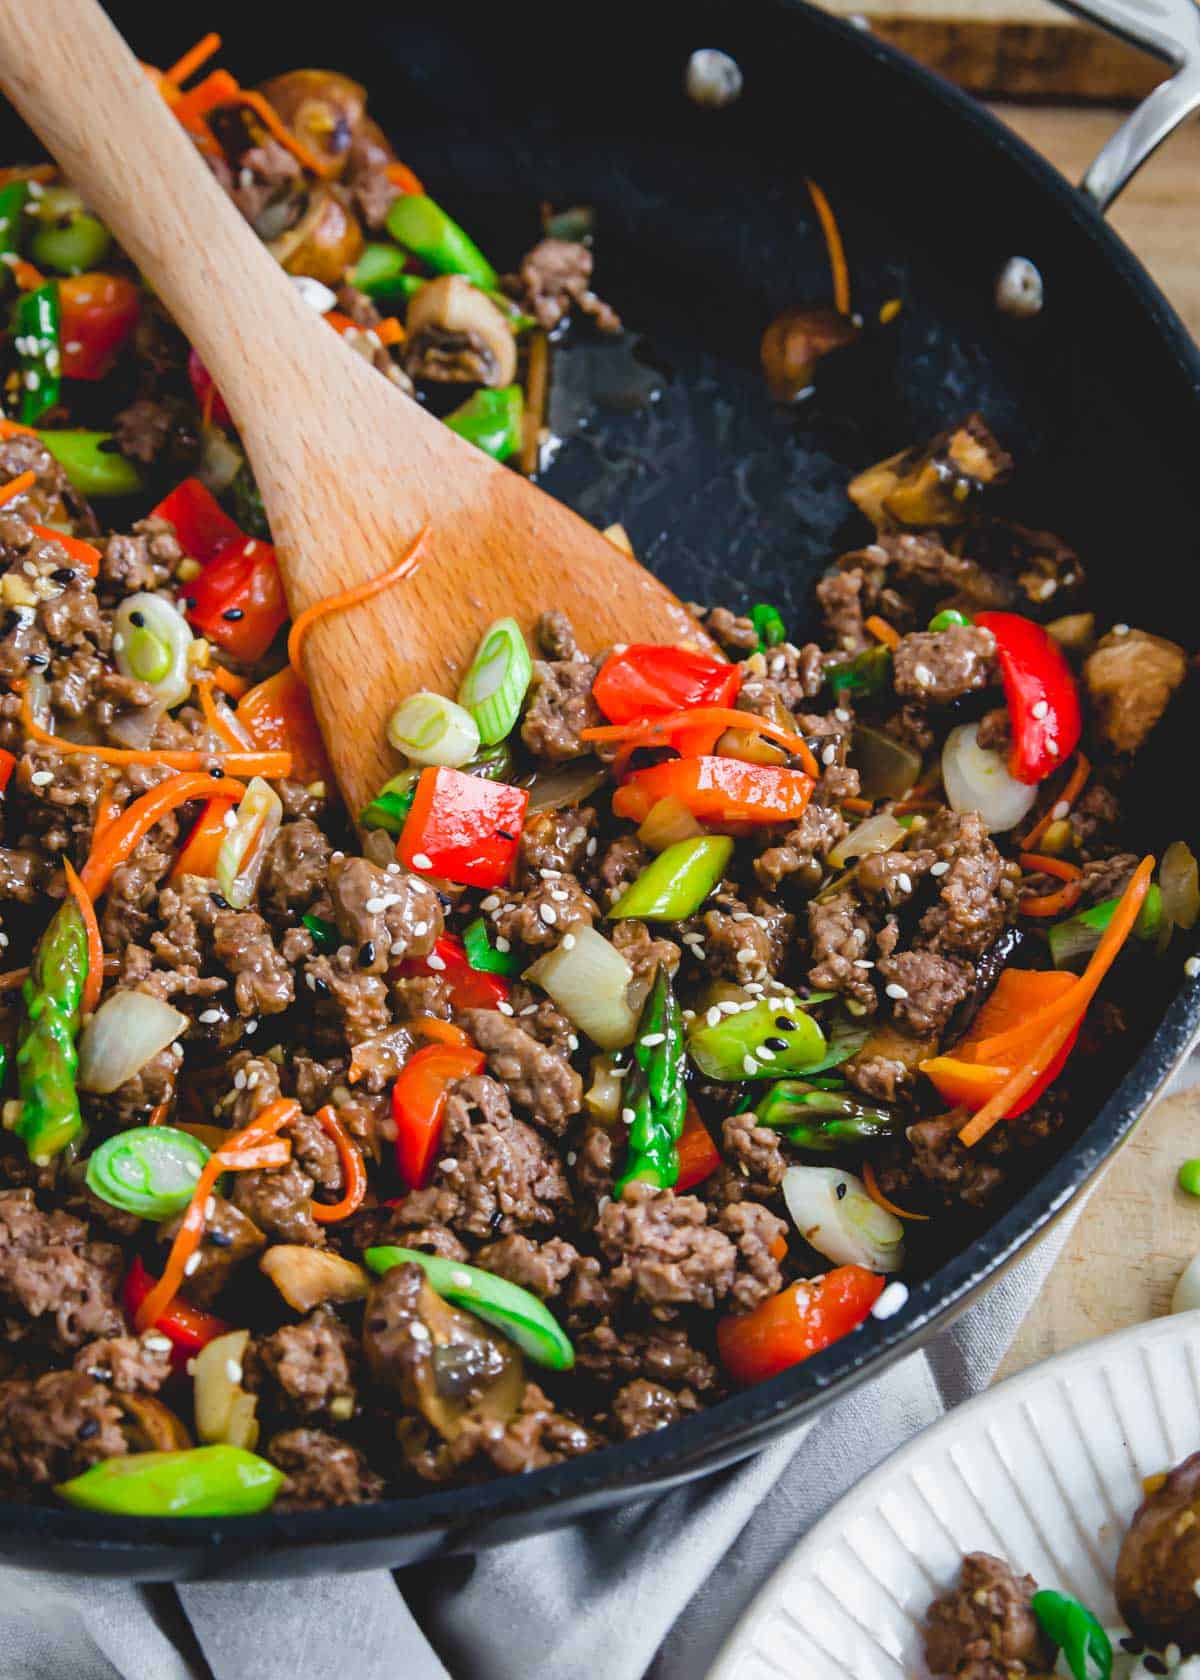 Ground beef with vegetables coated in a homemade stir fry sauce in a pan with wooden spatula.